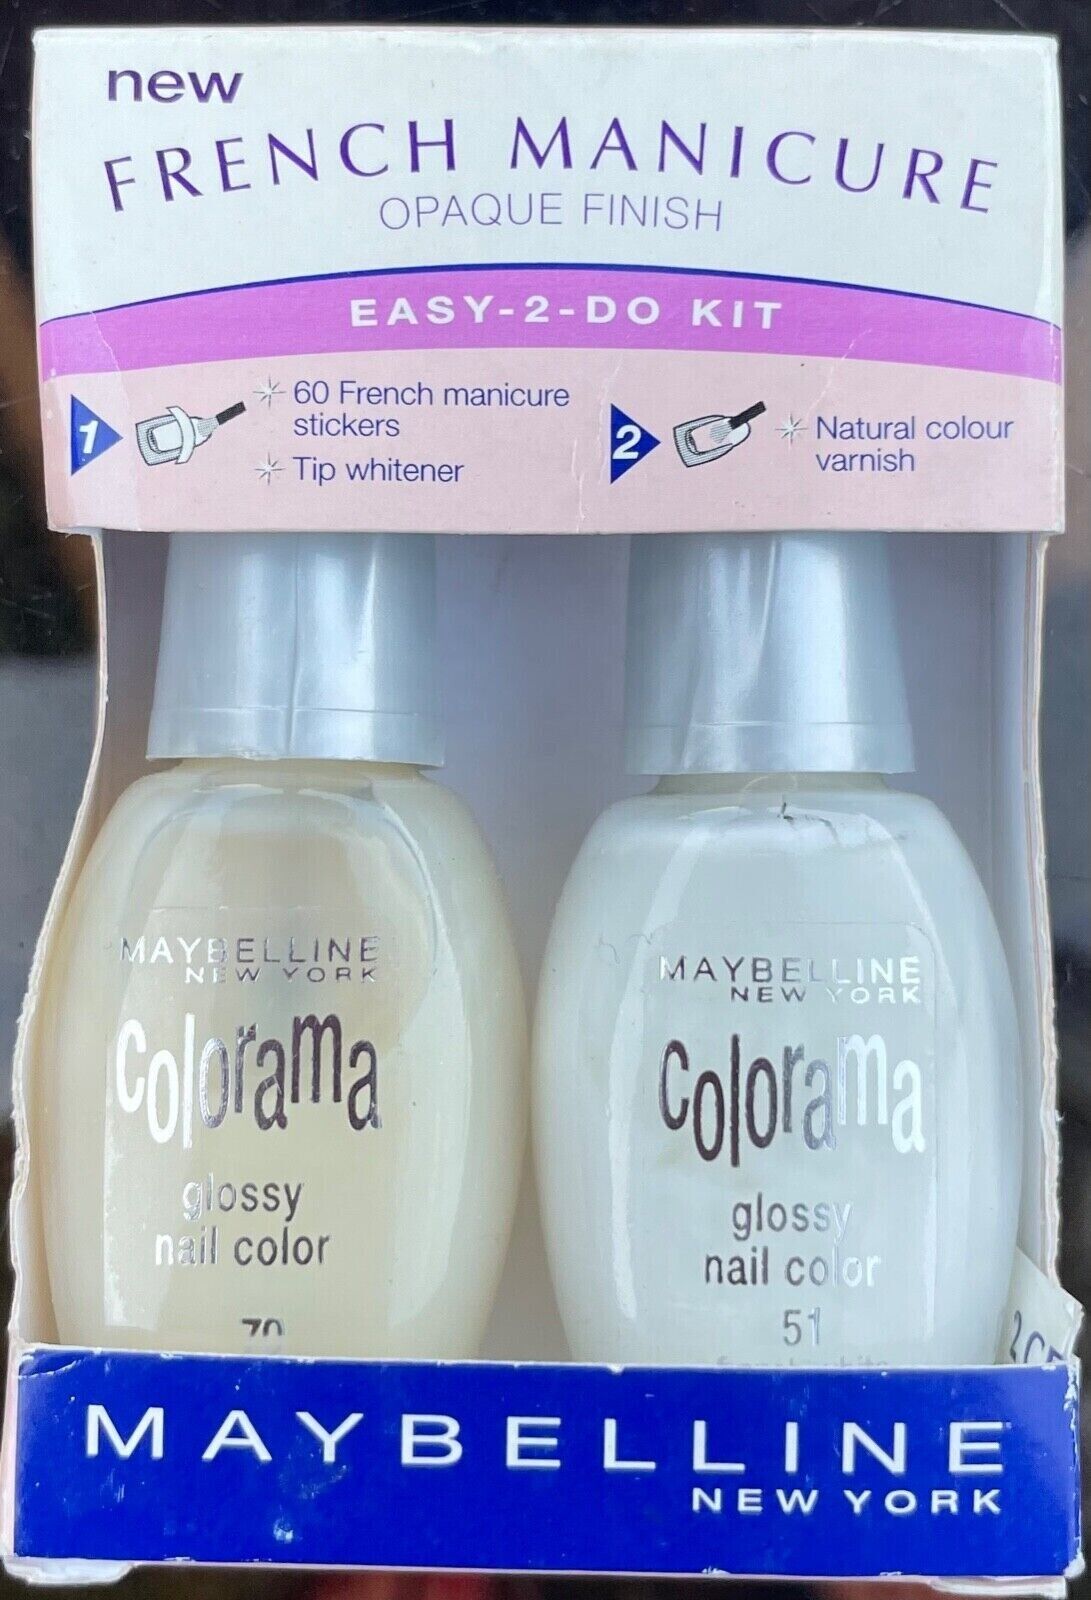 10 Shades of Maybelline Colorama | Groupon Goods